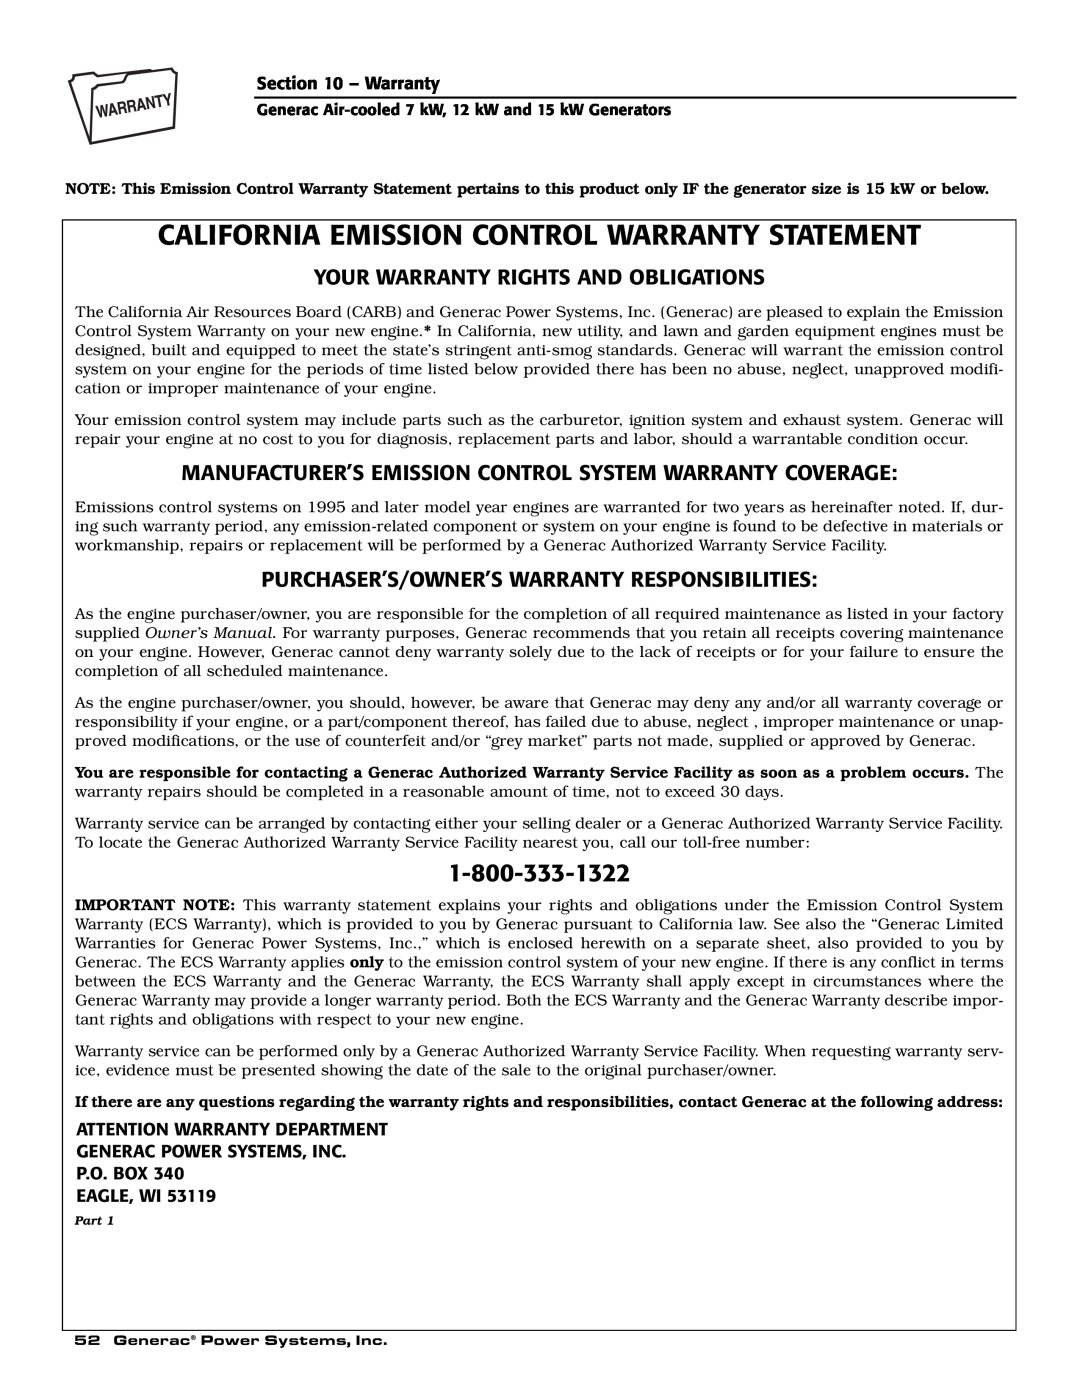 Generac 04673-2, 04675-3 California Emission Control Warranty Statement, Your Warranty Rights And Obligations, Eagle, Wi 